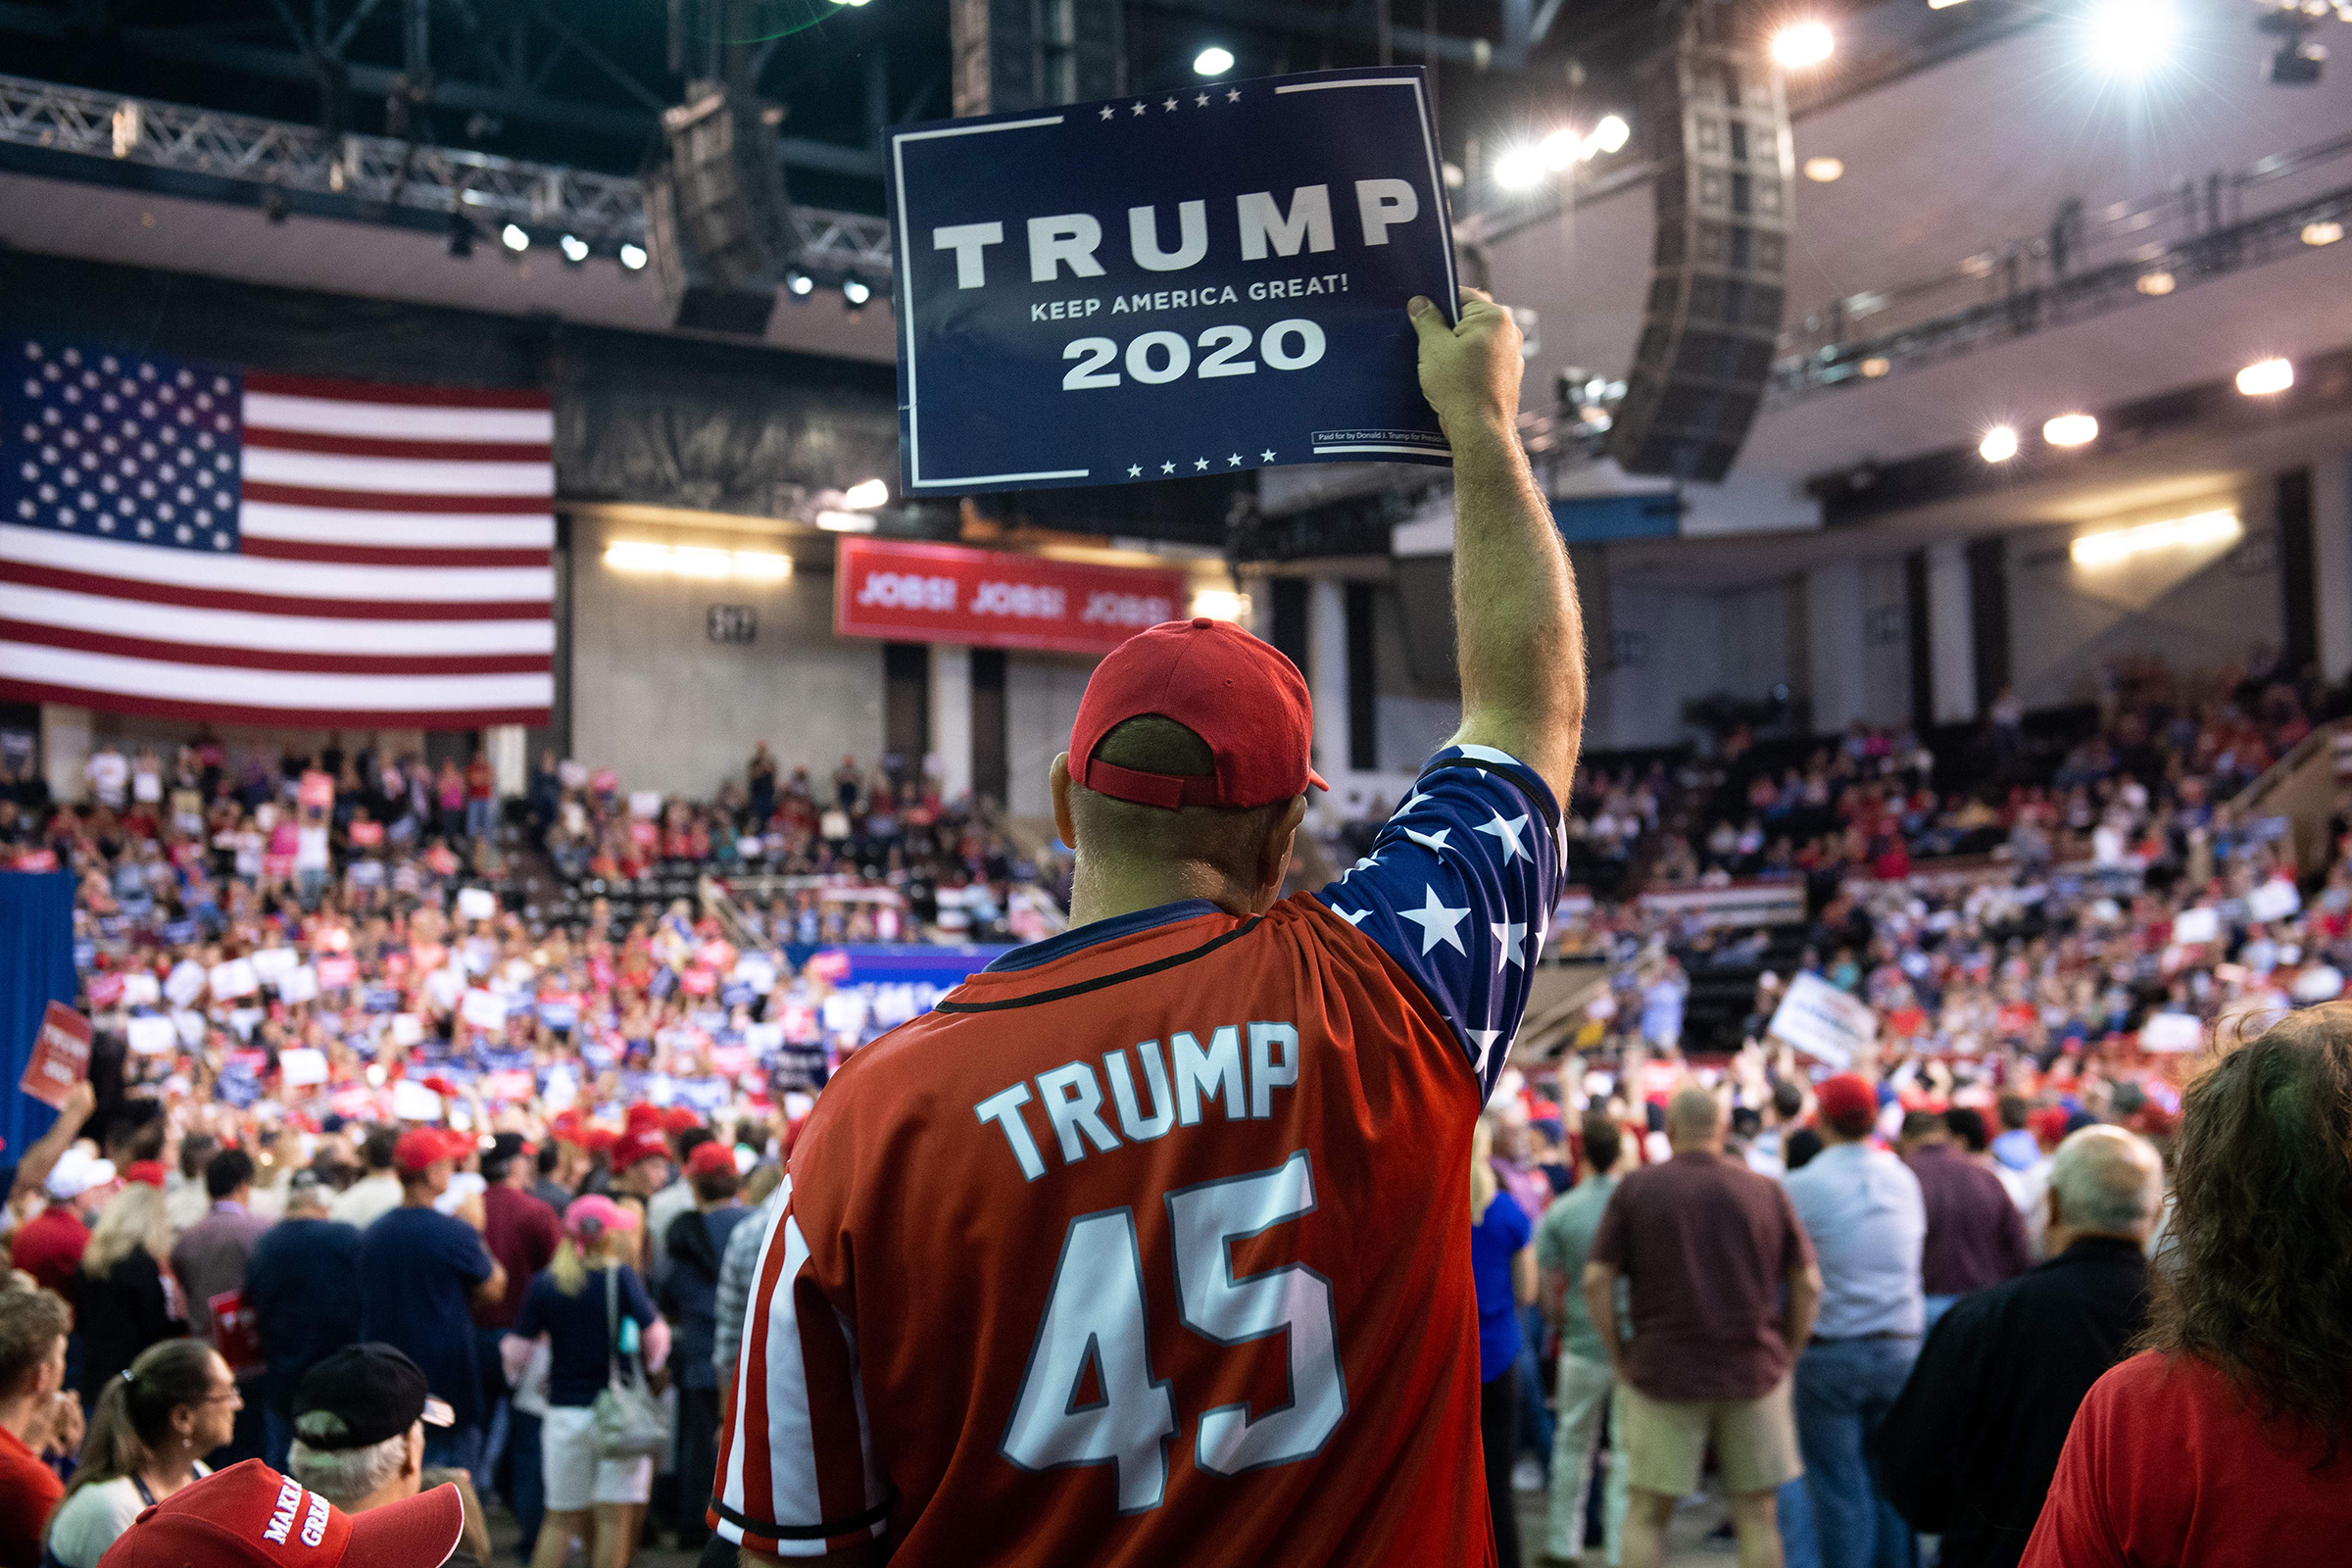 A Trump supporter holds up a sign as the US president speaks during a "Keep America Great" rally at Sudduth Coliseum in Lake Charles, La. on Oct. 11, 2019 (Saul Loeb—AFP/Getty Images)